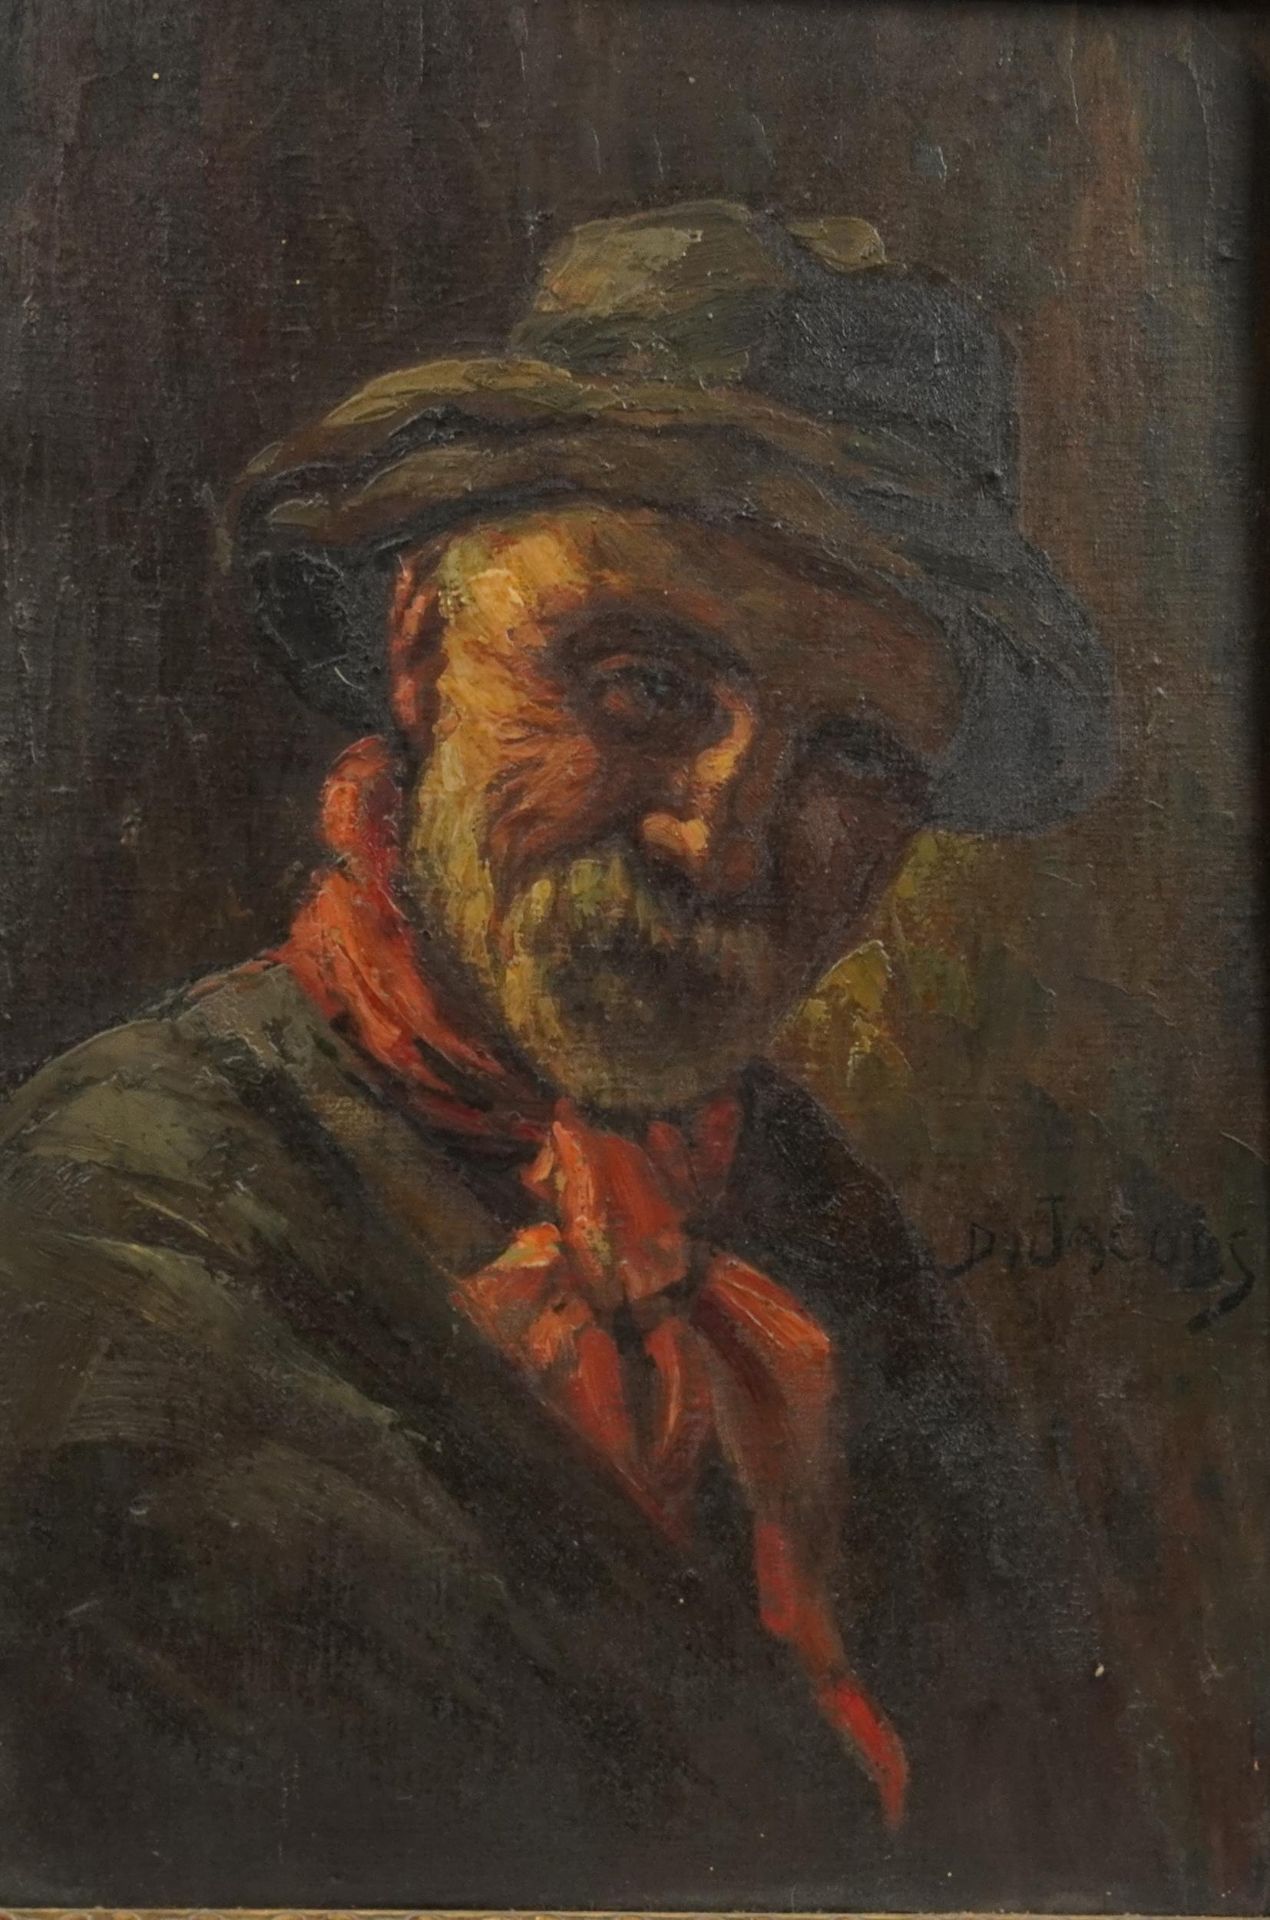 D Jacobs - Head and shoulders portrait of a bearded gentleman wearing a hat, oil on board, mounted